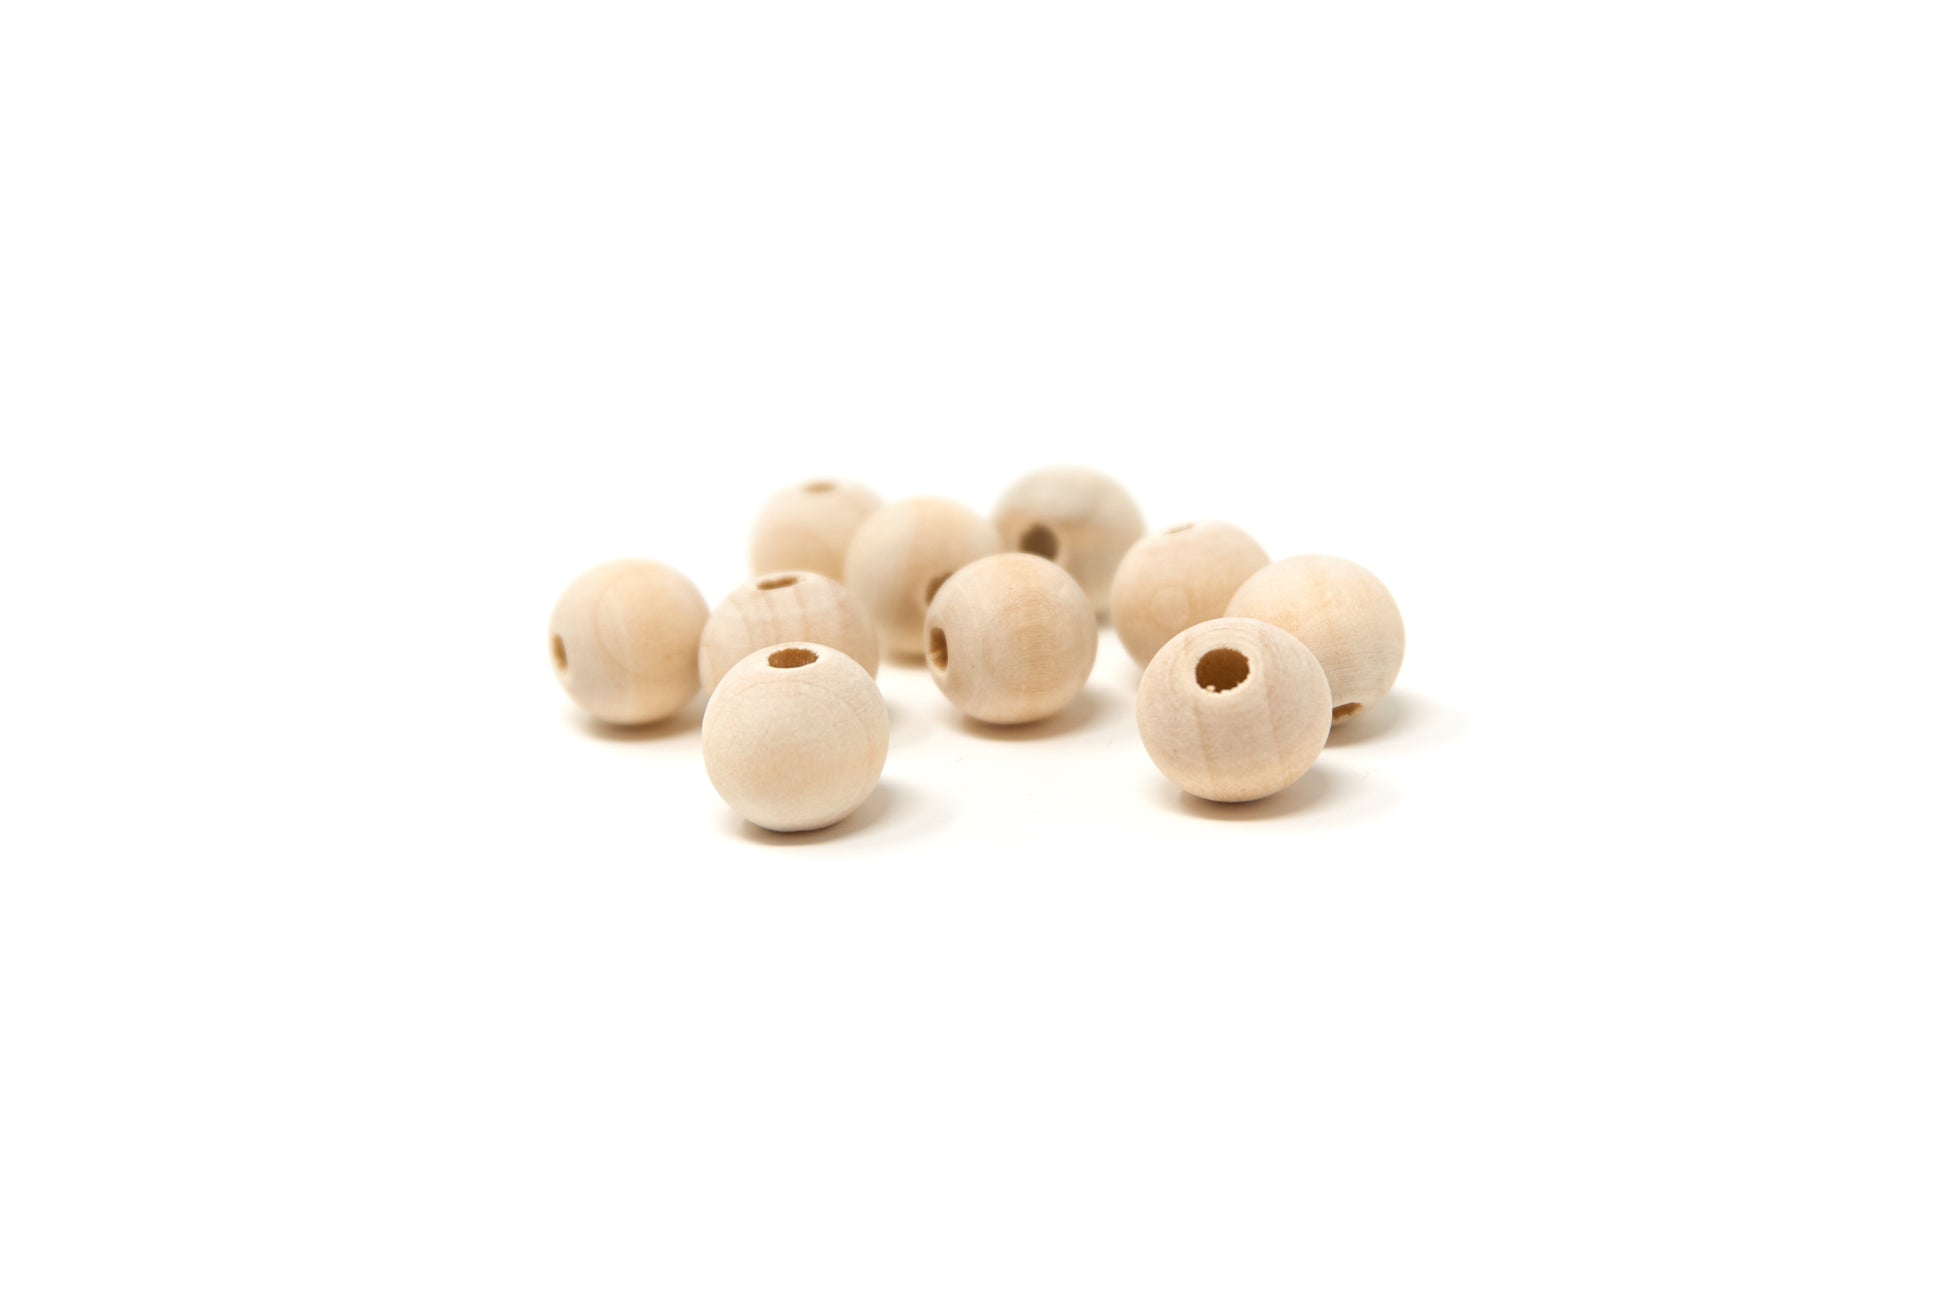 Natural Round Wood Beads 12mm 10 pieces - Cameos Art Shop